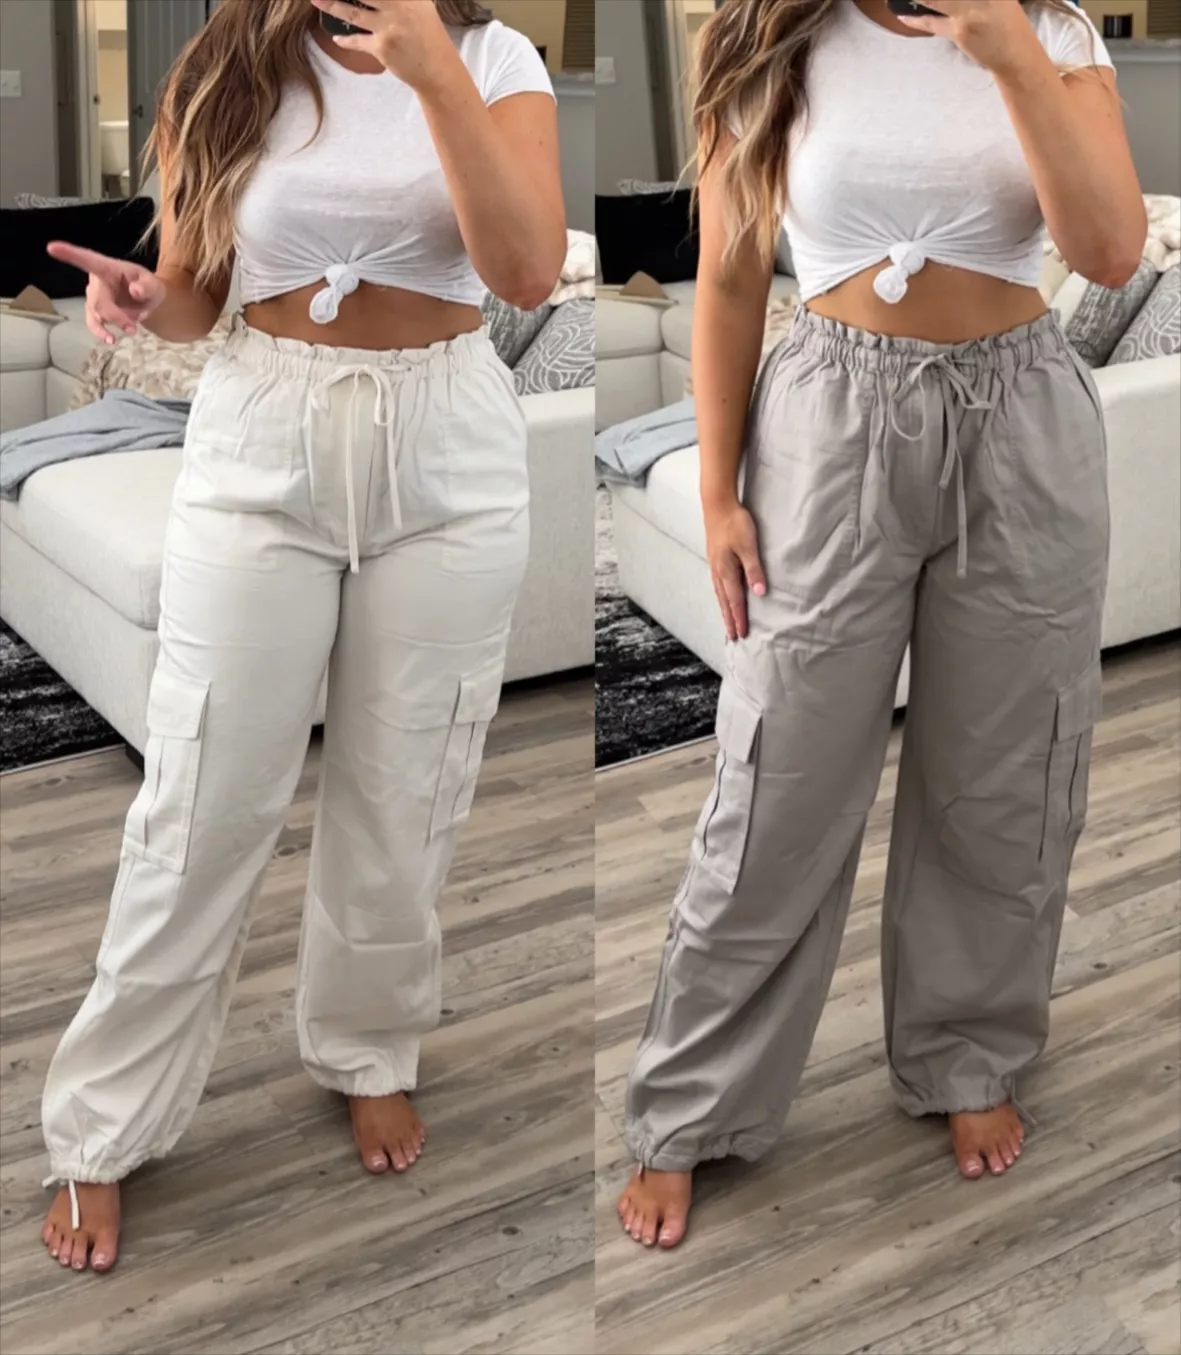 Cargo Pant Outfit Ideas we LOVE